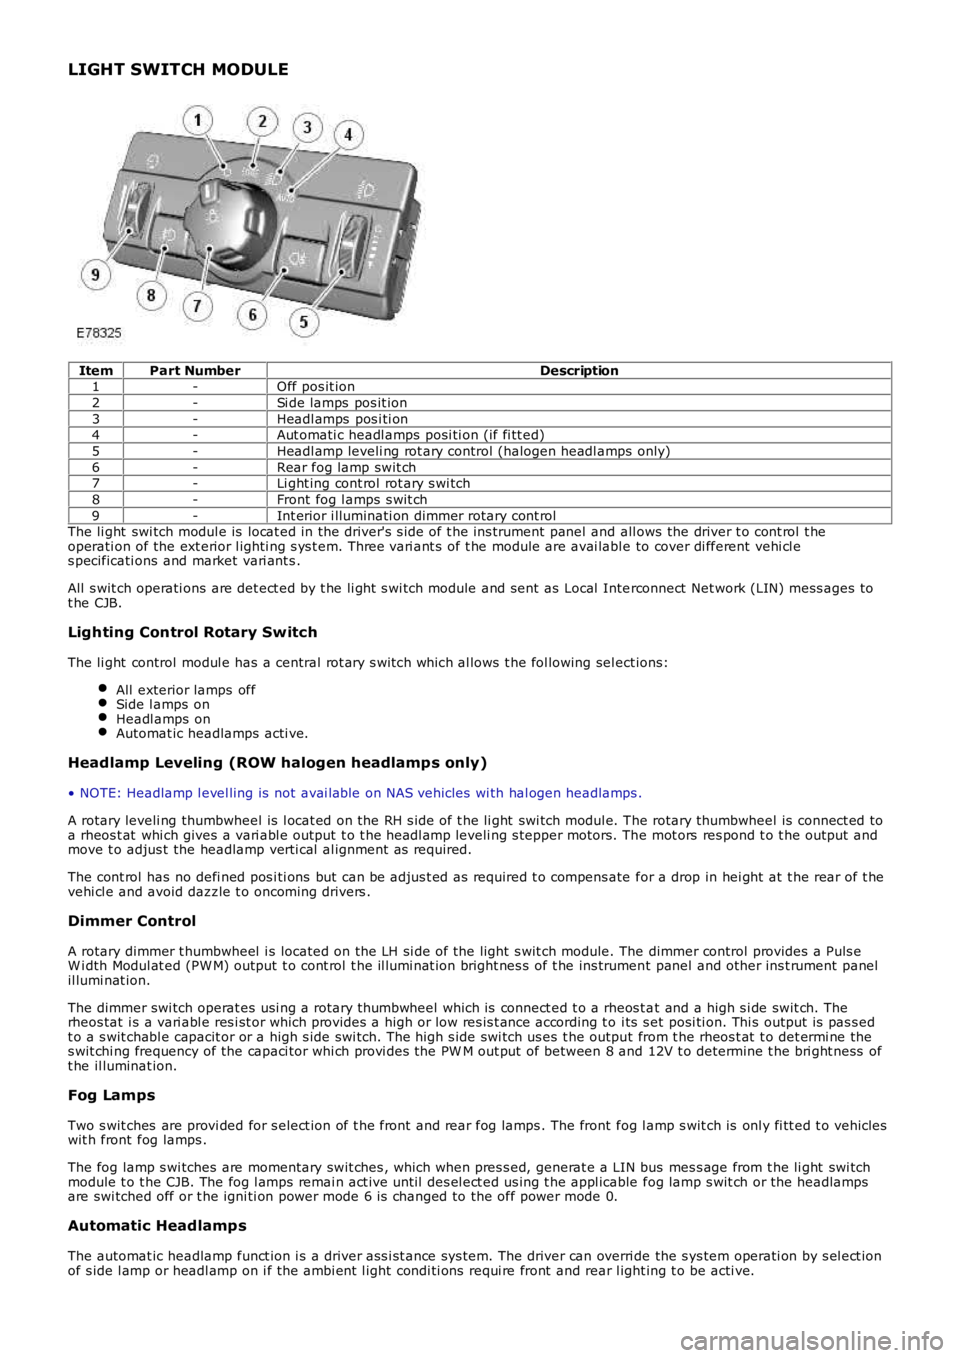 LAND ROVER FRELANDER 2 2006  Repair Manual LIGHT SWITCH MODULE
ItemPart NumberDescription1-Off pos it ion
2-Si de lamps  pos it ion
3-Headl amps  pos i ti on4-Aut omati c headl amps posi ti on (if fi tt ed)
5-Headl amp leveli ng rot ary contro